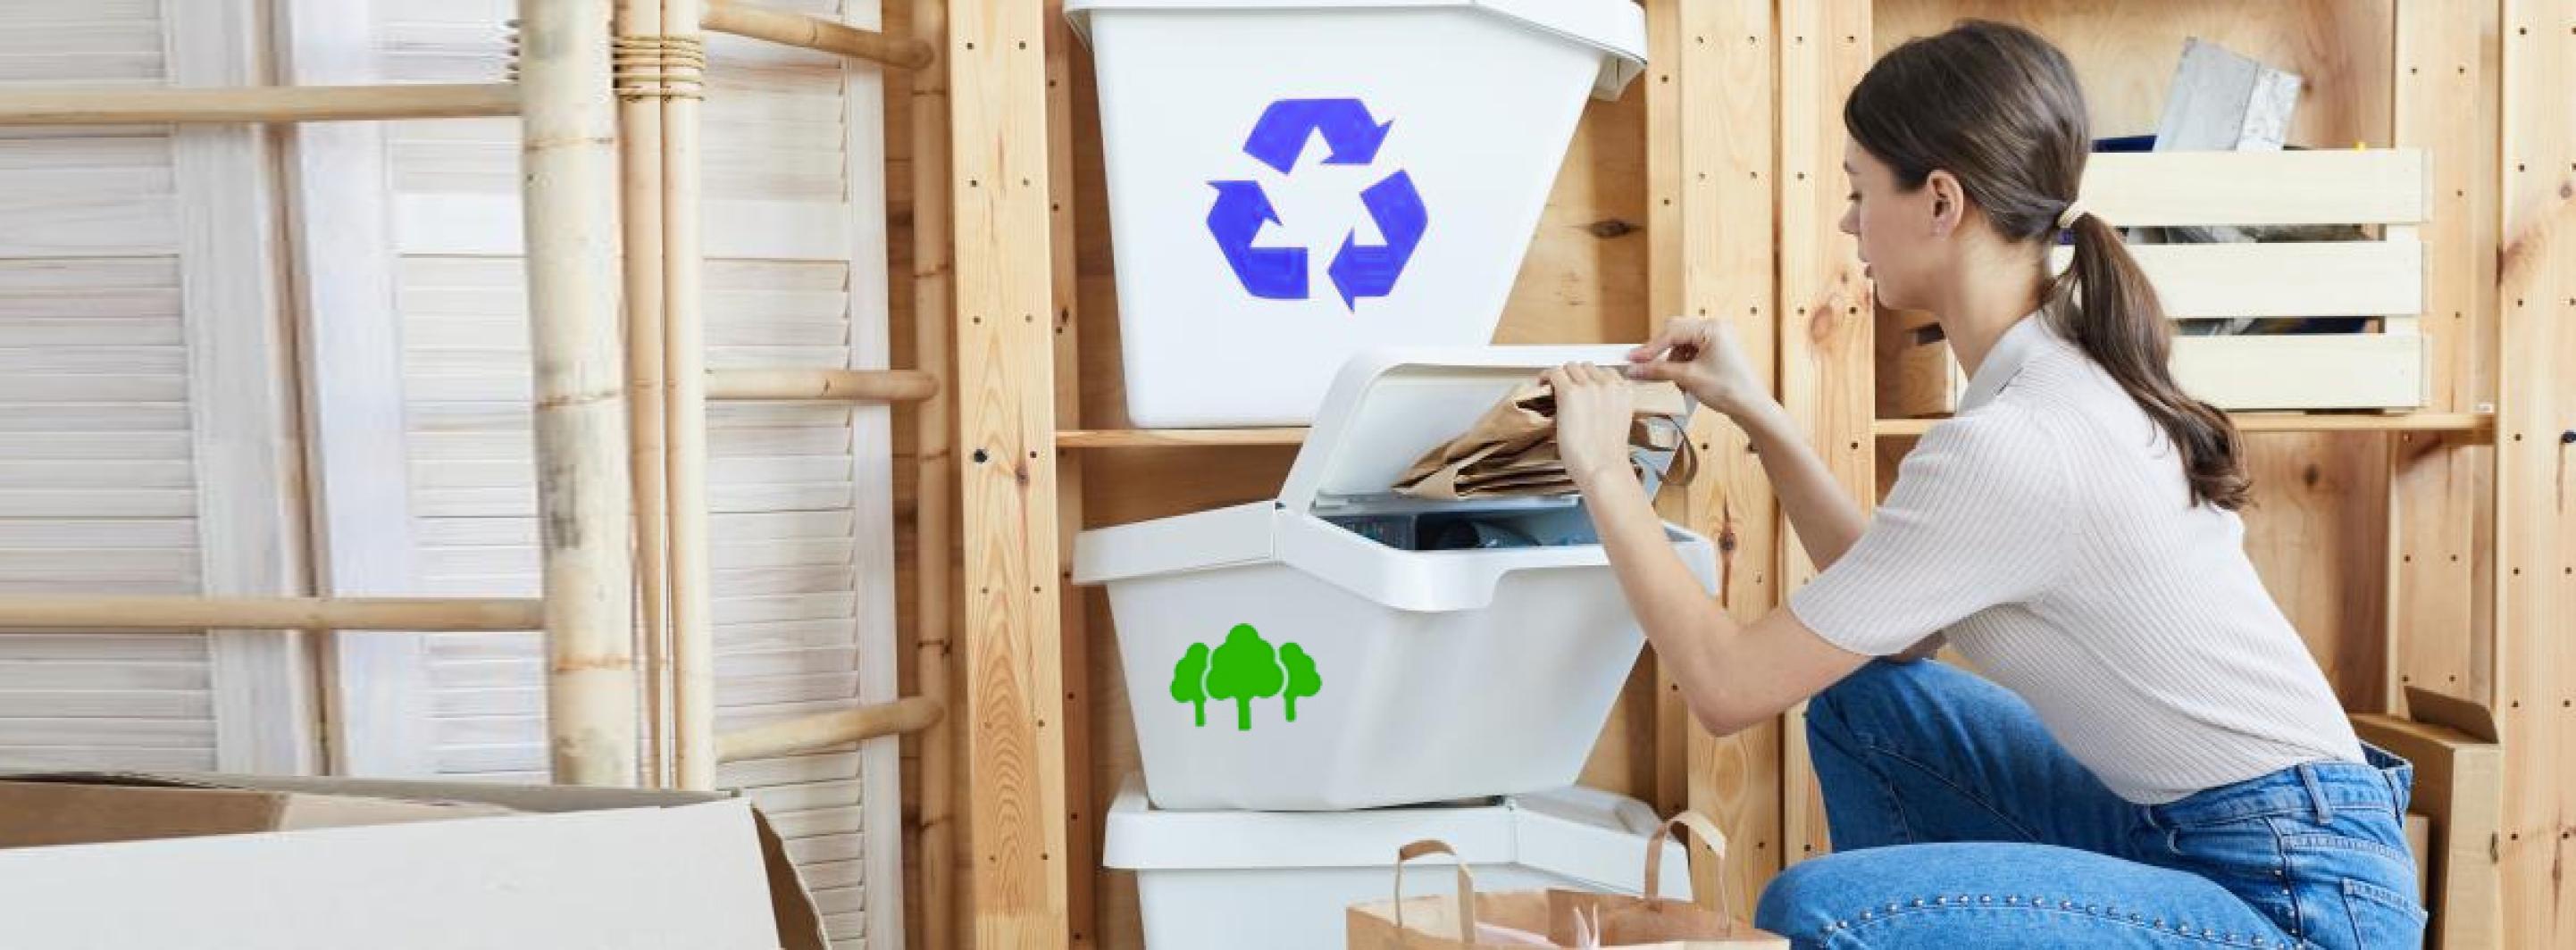 Recycling Center At Home